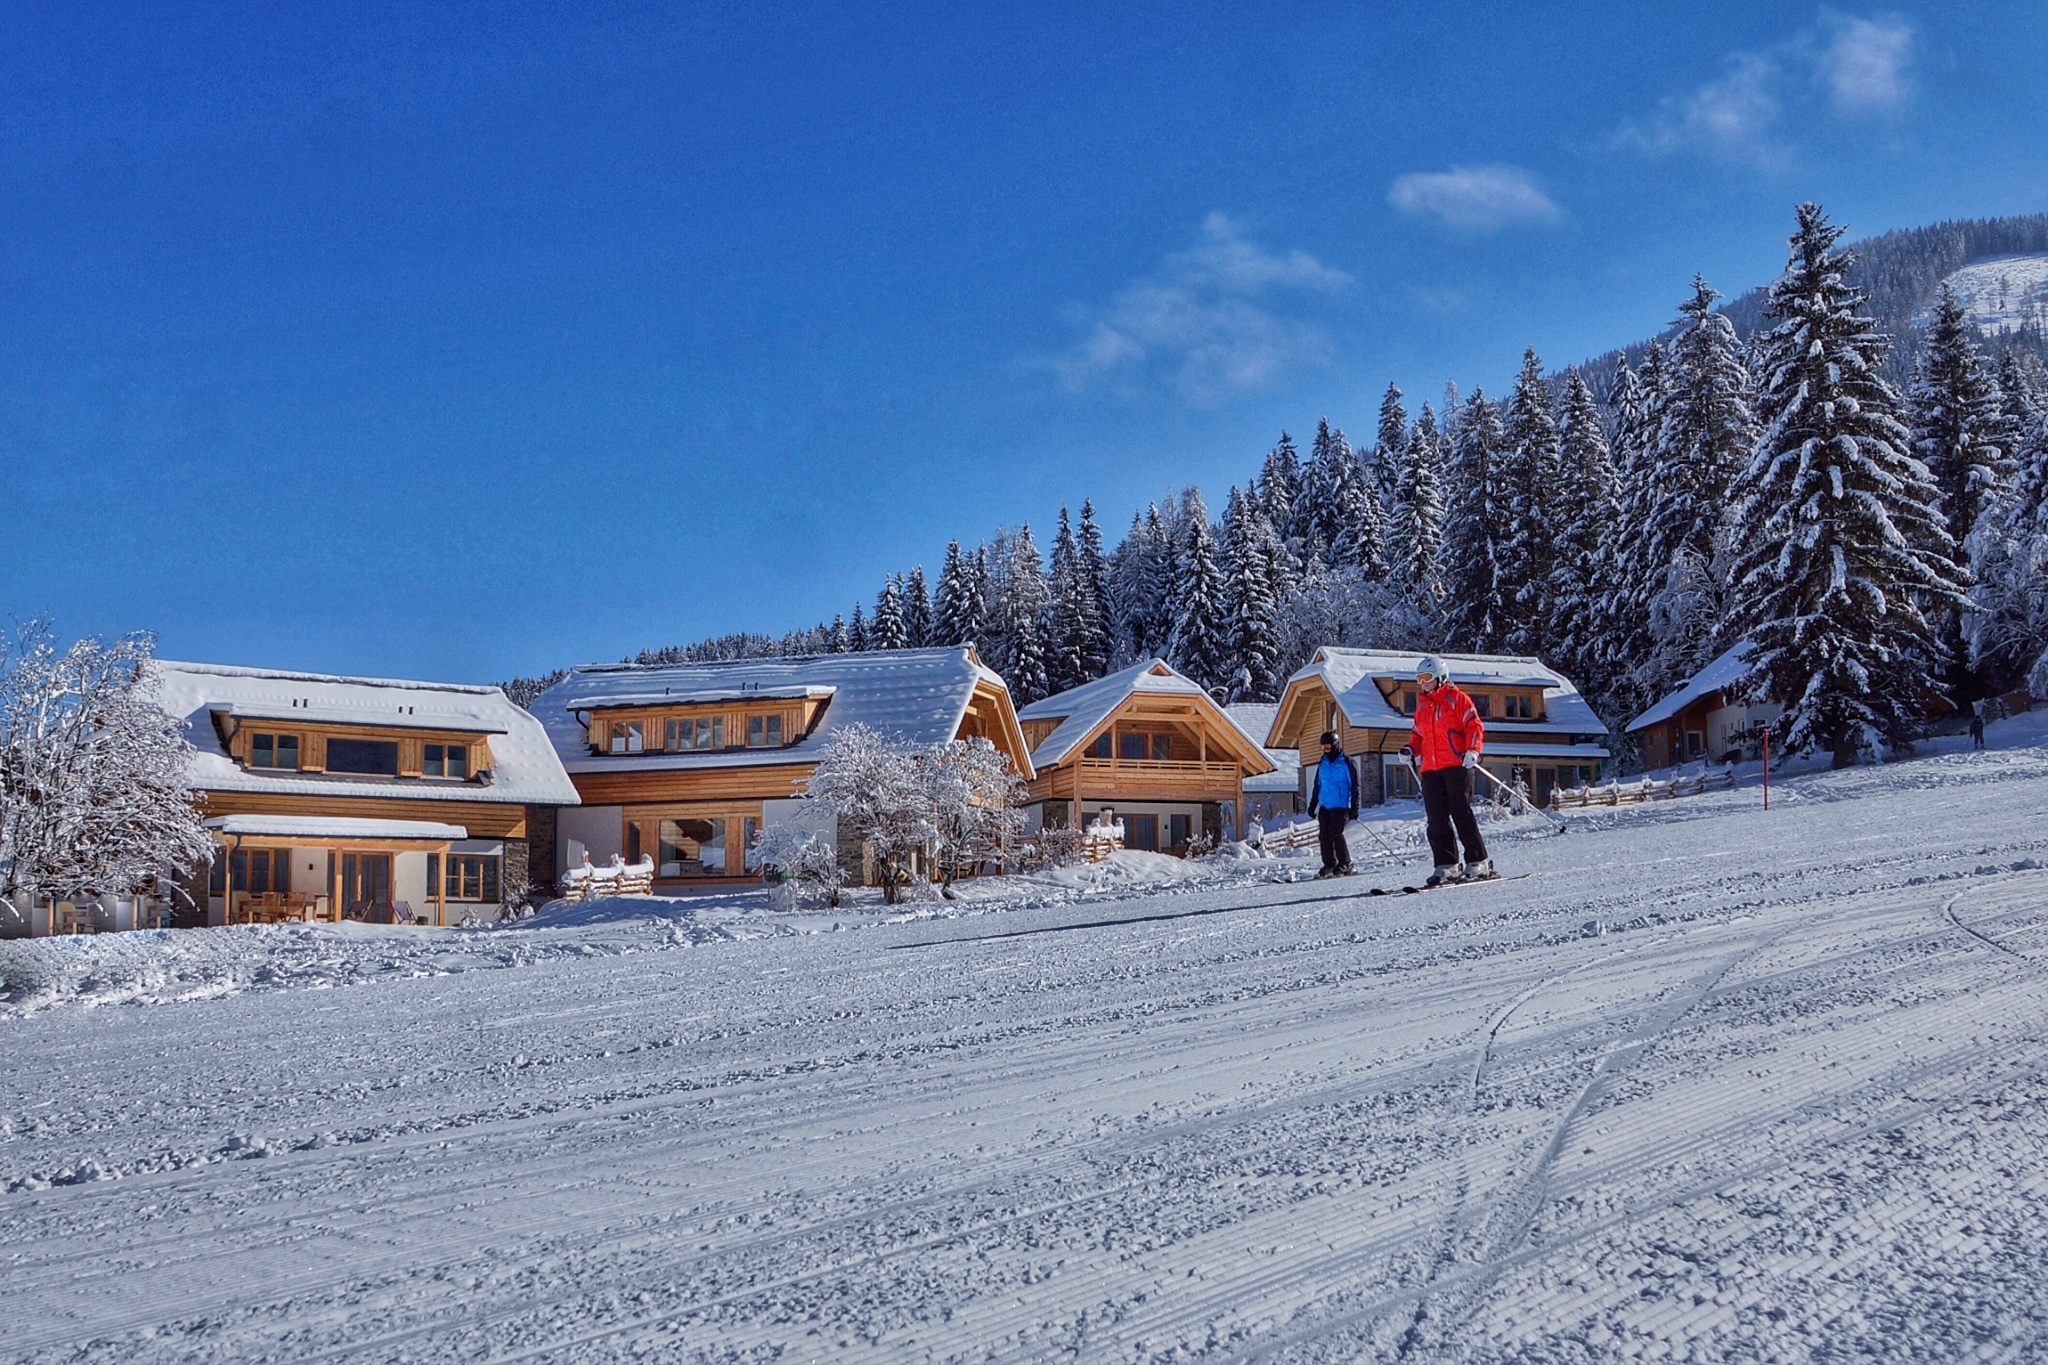 Two skiers passing the chalets in winter